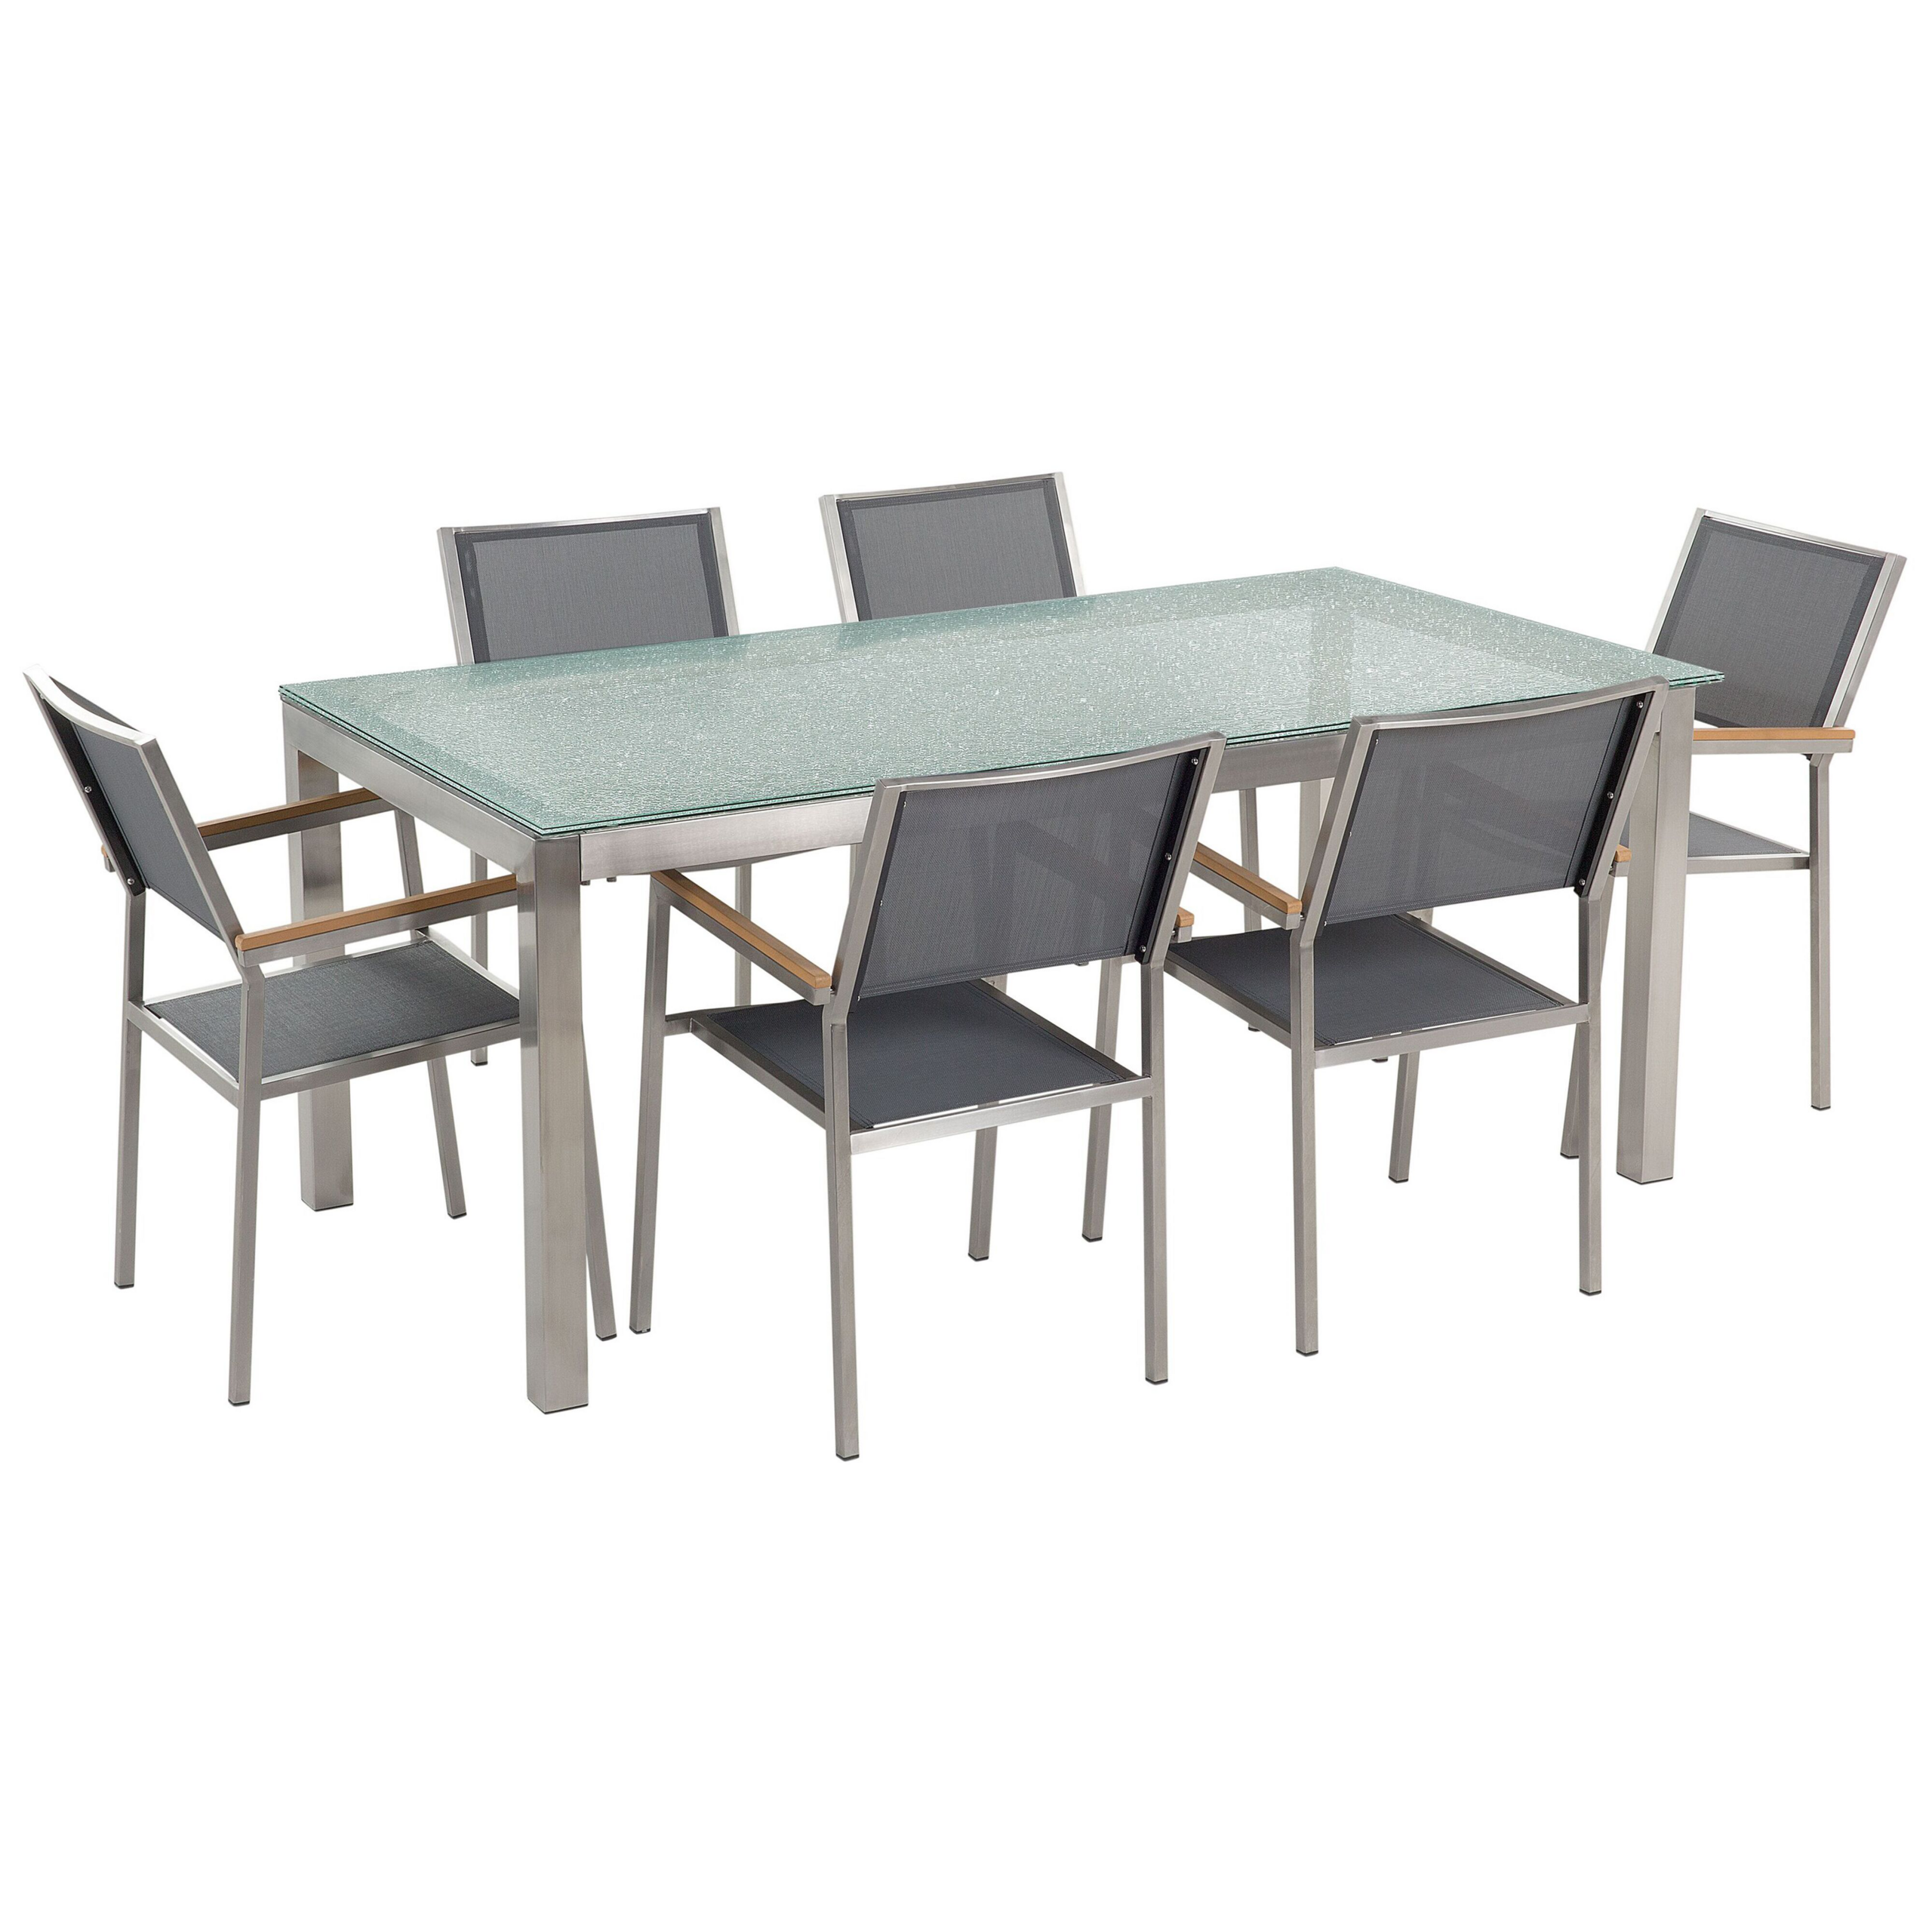 Beliani Garden Dining Set Grey with Cracked Glass Table Top 6 Seats 180 x 90 cm